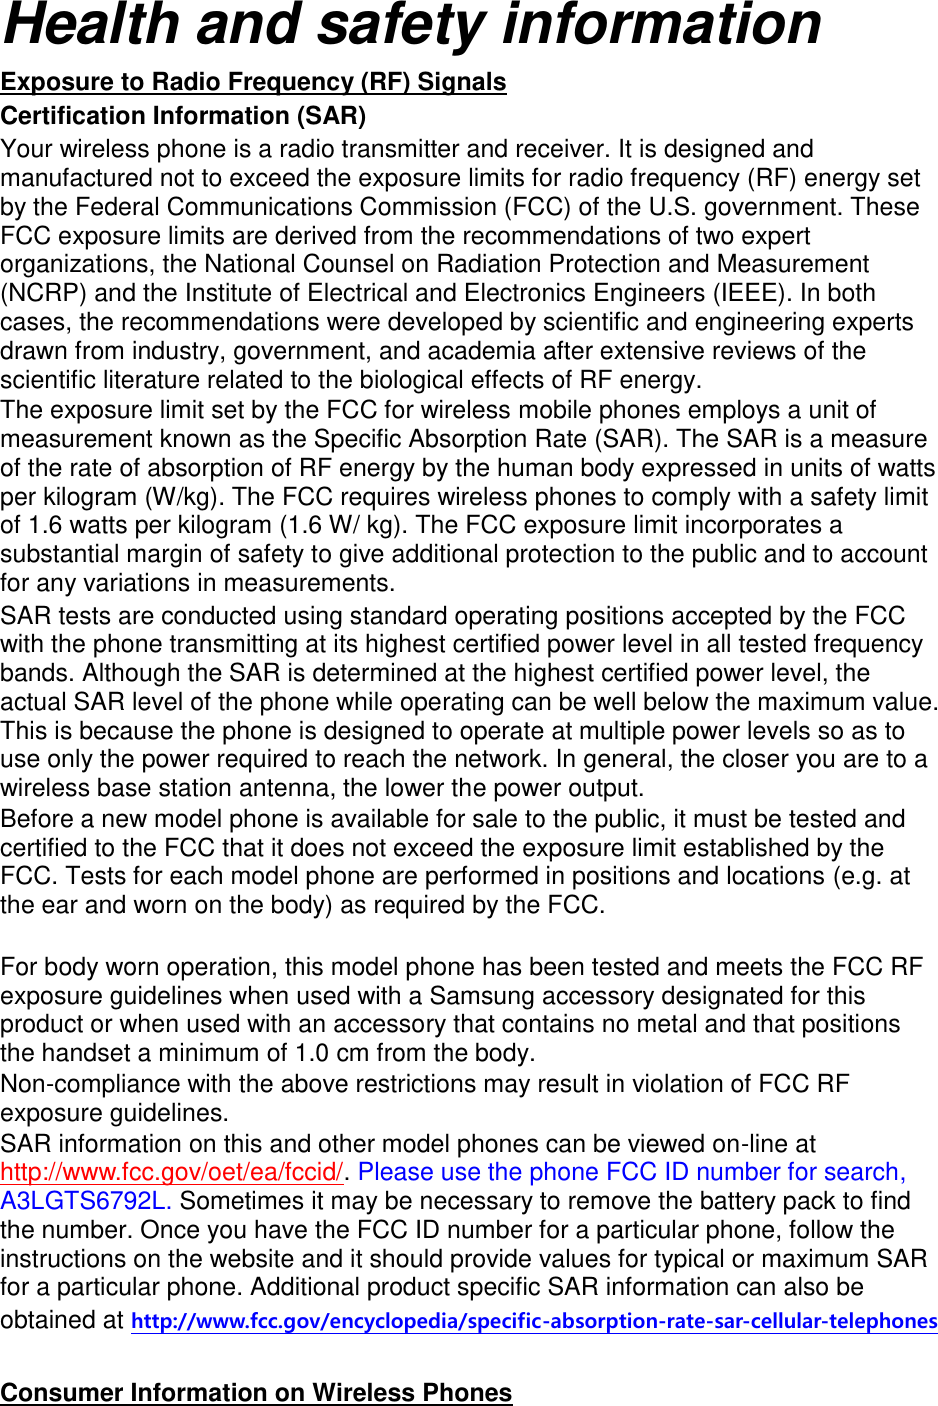 Health and safety information Exposure to Radio Frequency (RF) Signals Certification Information (SAR) Your wireless phone is a radio transmitter and receiver. It is designed and manufactured not to exceed the exposure limits for radio frequency (RF) energy set by the Federal Communications Commission (FCC) of the U.S. government. These FCC exposure limits are derived from the recommendations of two expert organizations, the National Counsel on Radiation Protection and Measurement (NCRP) and the Institute of Electrical and Electronics Engineers (IEEE). In both cases, the recommendations were developed by scientific and engineering experts drawn from industry, government, and academia after extensive reviews of the scientific literature related to the biological effects of RF energy. The exposure limit set by the FCC for wireless mobile phones employs a unit of measurement known as the Specific Absorption Rate (SAR). The SAR is a measure of the rate of absorption of RF energy by the human body expressed in units of watts per kilogram (W/kg). The FCC requires wireless phones to comply with a safety limit of 1.6 watts per kilogram (1.6 W/ kg). The FCC exposure limit incorporates a substantial margin of safety to give additional protection to the public and to account for any variations in measurements. SAR tests are conducted using standard operating positions accepted by the FCC with the phone transmitting at its highest certified power level in all tested frequency bands. Although the SAR is determined at the highest certified power level, the actual SAR level of the phone while operating can be well below the maximum value. This is because the phone is designed to operate at multiple power levels so as to use only the power required to reach the network. In general, the closer you are to a wireless base station antenna, the lower the power output. Before a new model phone is available for sale to the public, it must be tested and certified to the FCC that it does not exceed the exposure limit established by the FCC. Tests for each model phone are performed in positions and locations (e.g. at the ear and worn on the body) as required by the FCC.      For body worn operation, this model phone has been tested and meets the FCC RF exposure guidelines when used with a Samsung accessory designated for this product or when used with an accessory that contains no metal and that positions the handset a minimum of 1.0 cm from the body.   Non-compliance with the above restrictions may result in violation of FCC RF exposure guidelines. SAR information on this and other model phones can be viewed on-line at http://www.fcc.gov/oet/ea/fccid/. Please use the phone FCC ID number for search, A3LGTS6792L. Sometimes it may be necessary to remove the battery pack to find the number. Once you have the FCC ID number for a particular phone, follow the instructions on the website and it should provide values for typical or maximum SAR for a particular phone. Additional product specific SAR information can also be obtained at http://www.fcc.gov/encyclopedia/specific-absorption-rate-sar-cellular-telephones  Consumer Information on Wireless Phones 